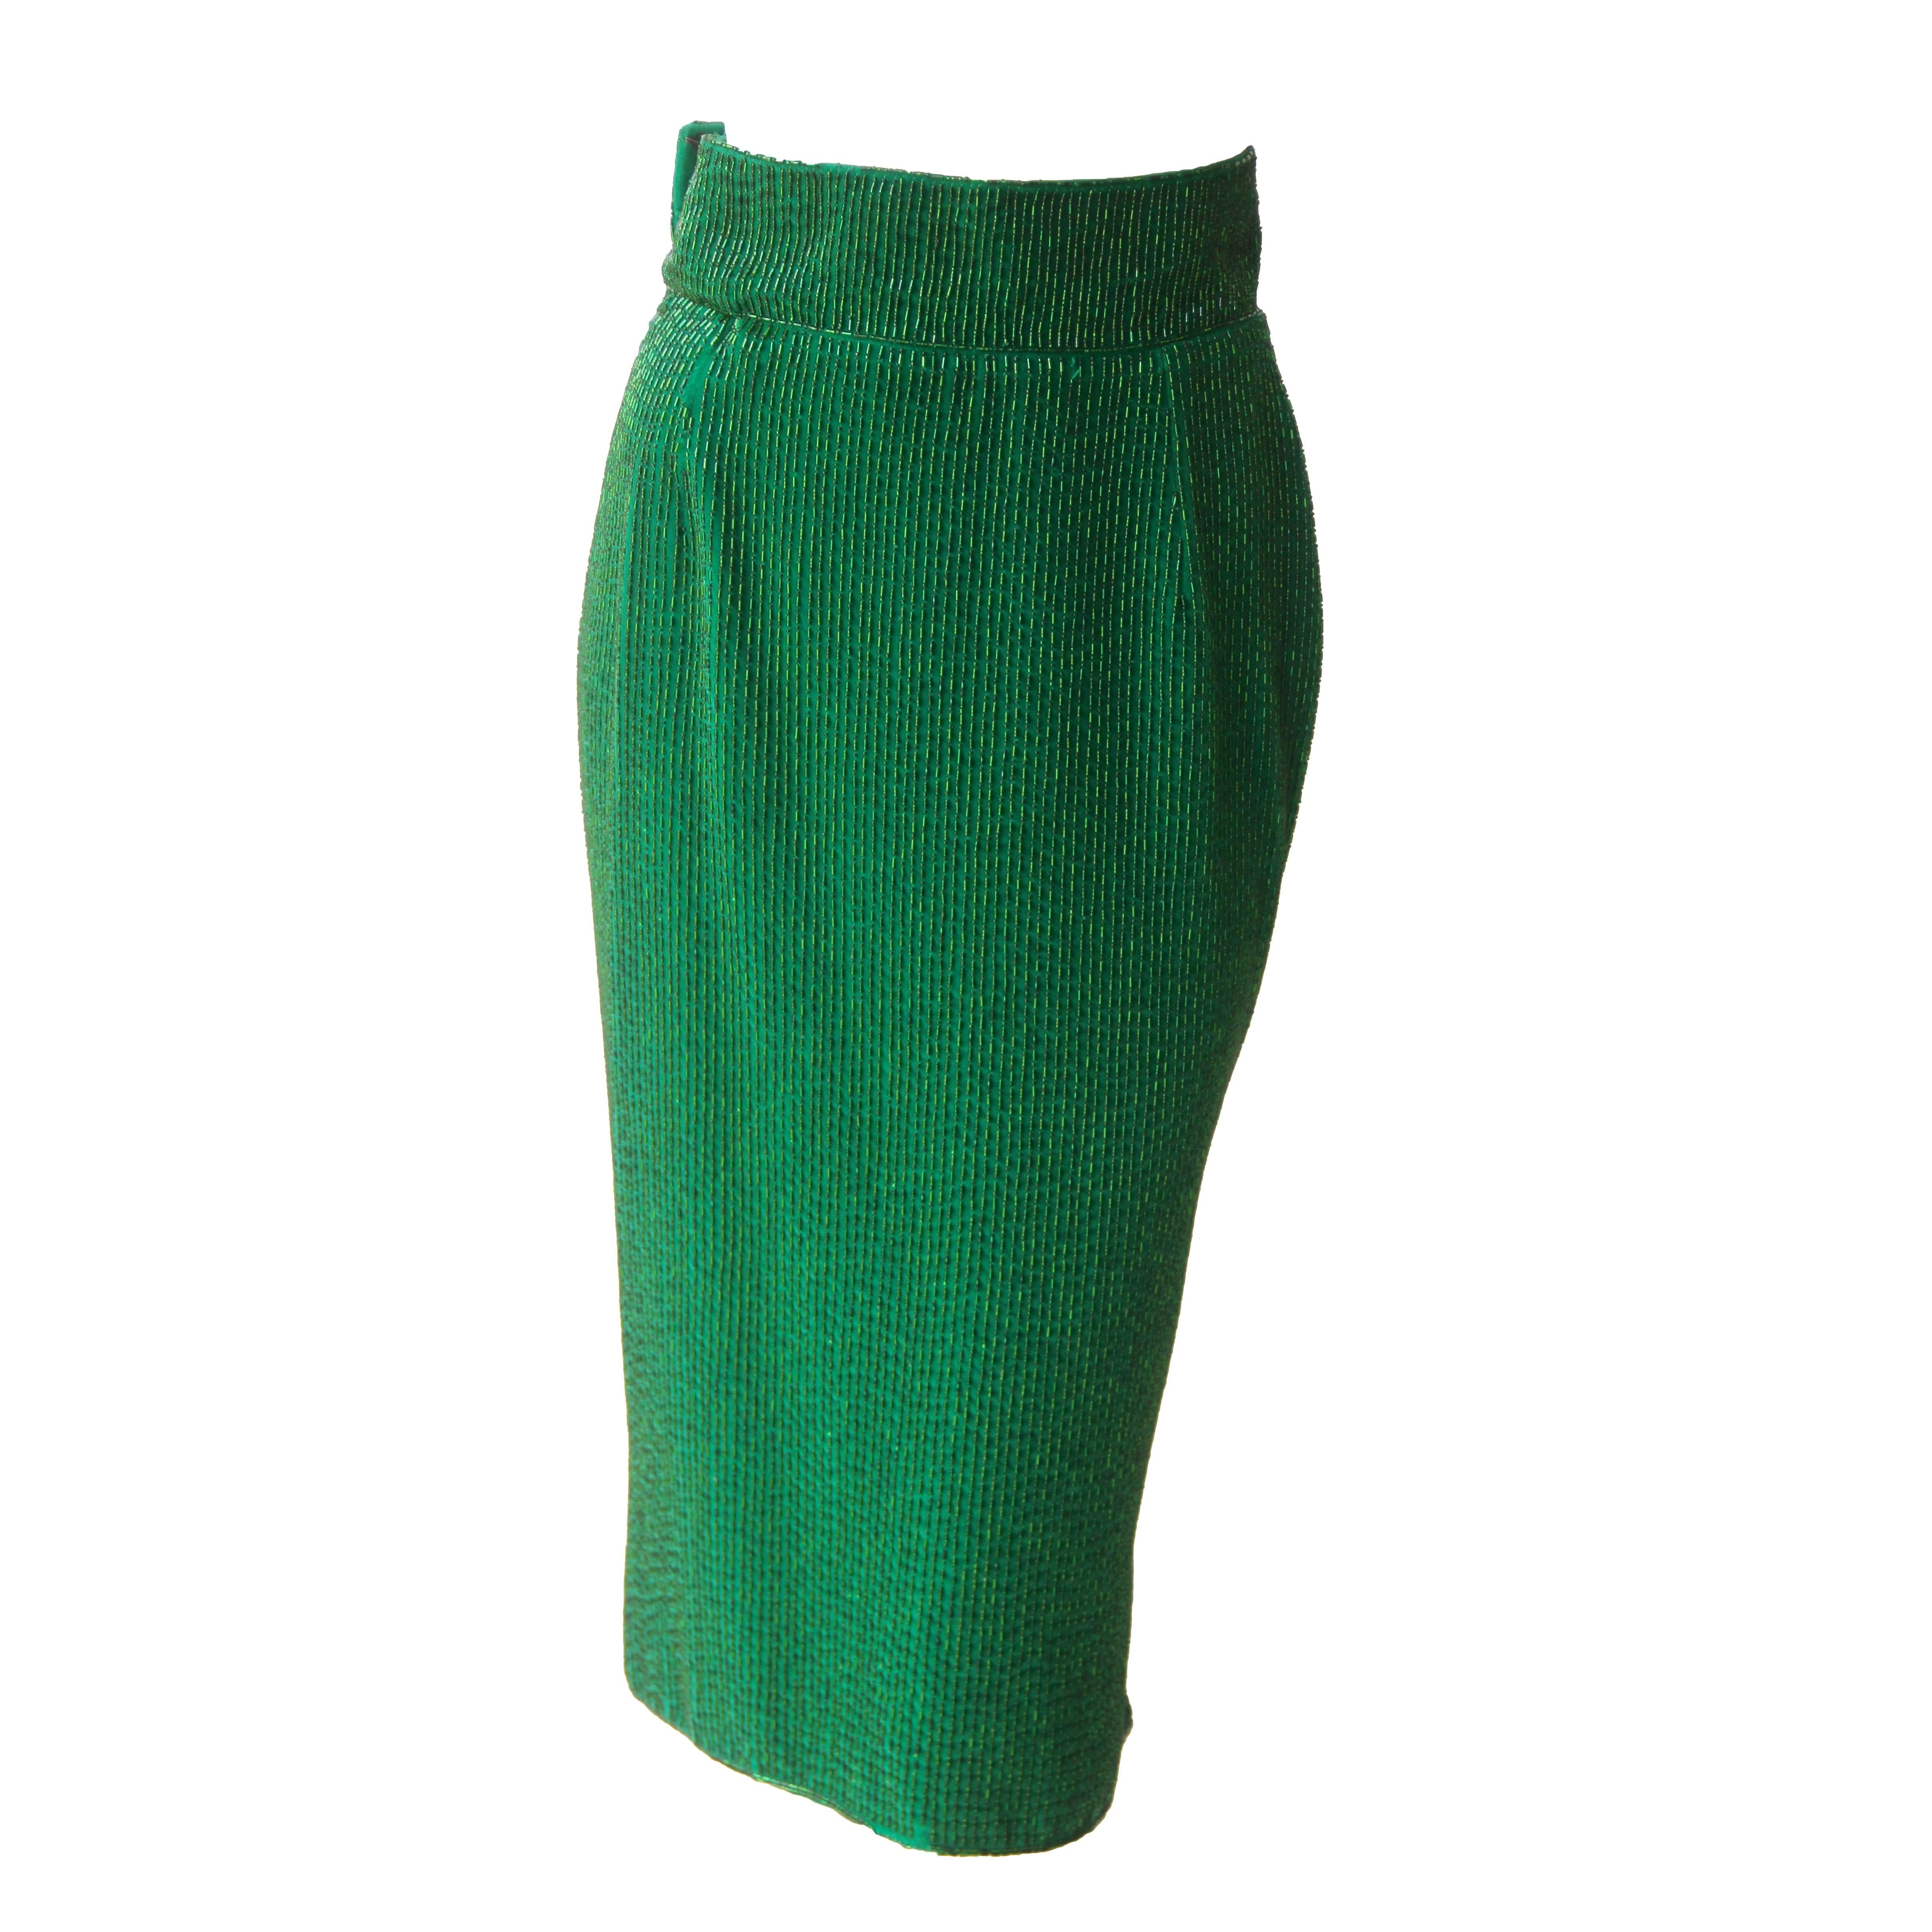 Early Gianni Versace Silk Beaded Evening Skirt 1983 For Sale